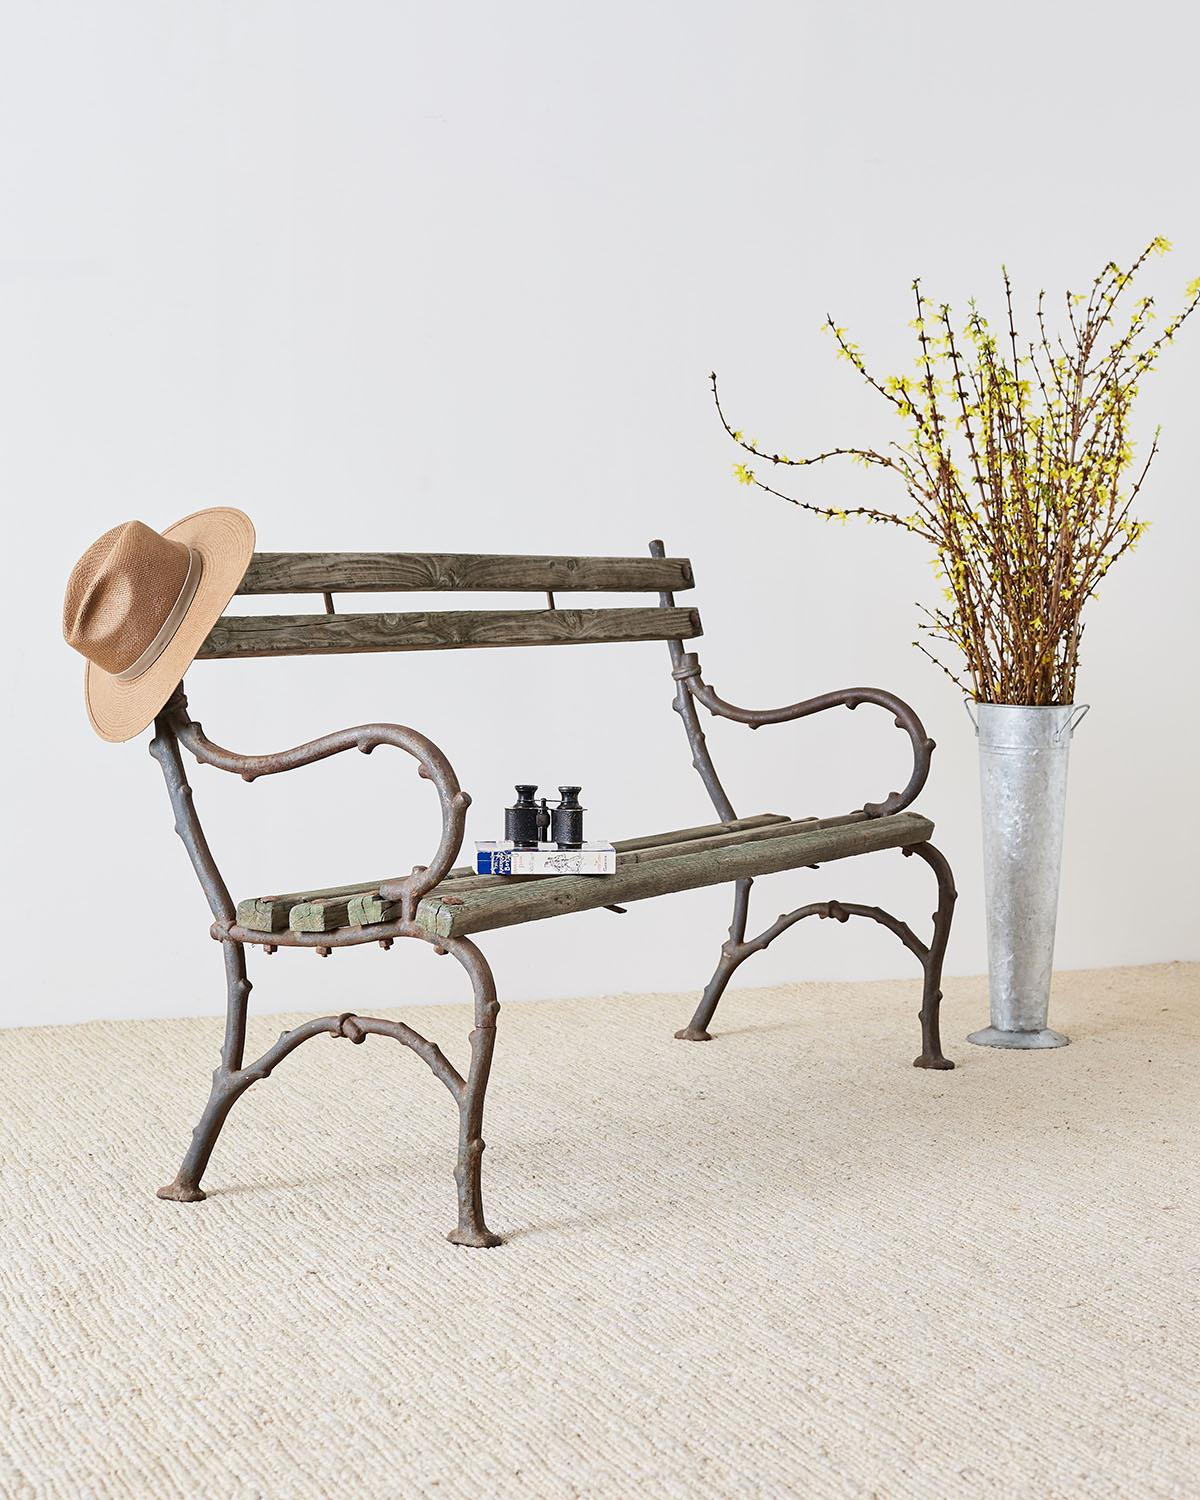 Rustic 19th century English garden bench having a branch twig style faux bois frame made of cast iron. The bench has graceful curved arms and legs with beautiful distressed patina on the cast iron and wood slats. Lovely understated style with a